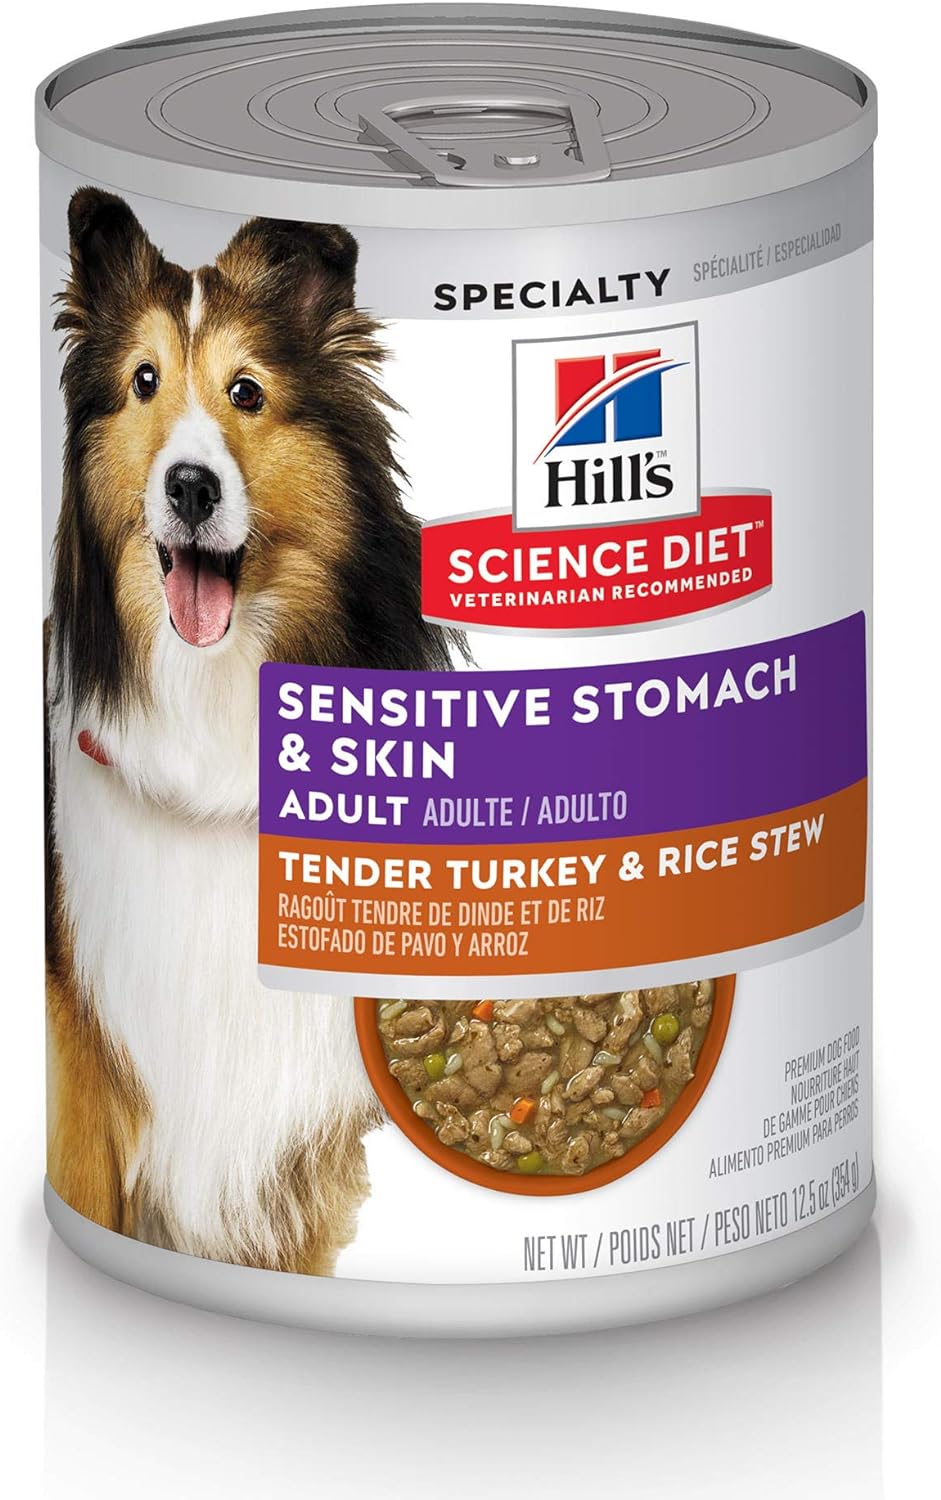 Hill's Science Diet Sensitive Stomach & Skin, Adult 1-6, Stomach & Skin Sensitivity Supoort, Wet Dog Food, Chicken & Barley Stew, 12.5 oz Can, Case of 12